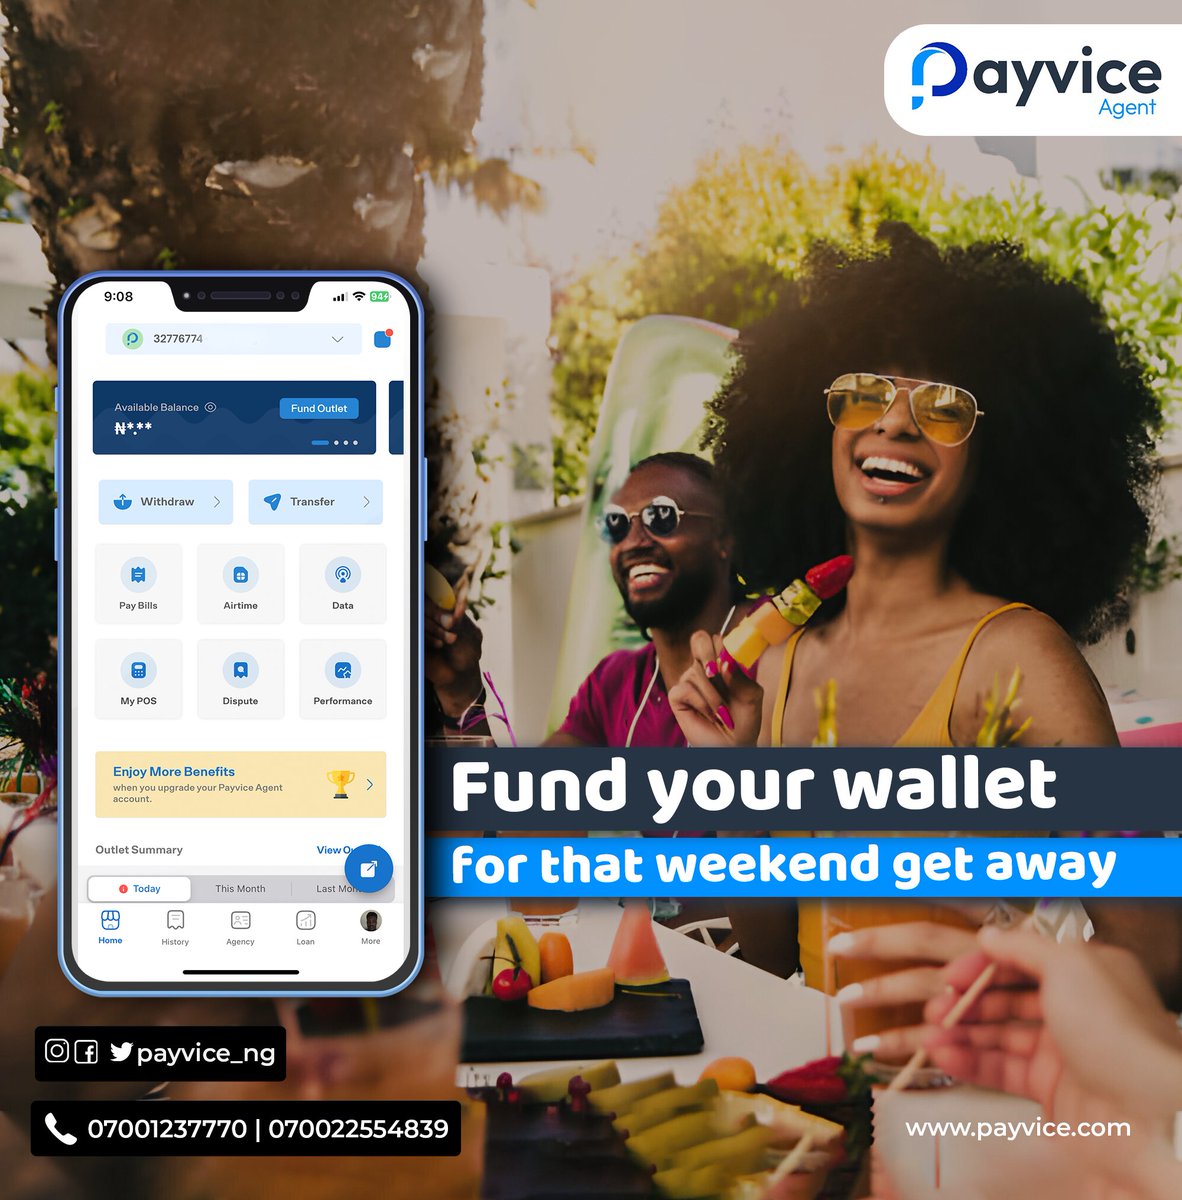 Whether you are spending precious time with a loved one, hanging out with buddies or simply chilling quietly in a serene location, you need an app to make those payments.

Download the Payvice mobile app on Google Play store or Apple Store.

#Payments
#BillsPayments
#Tgif